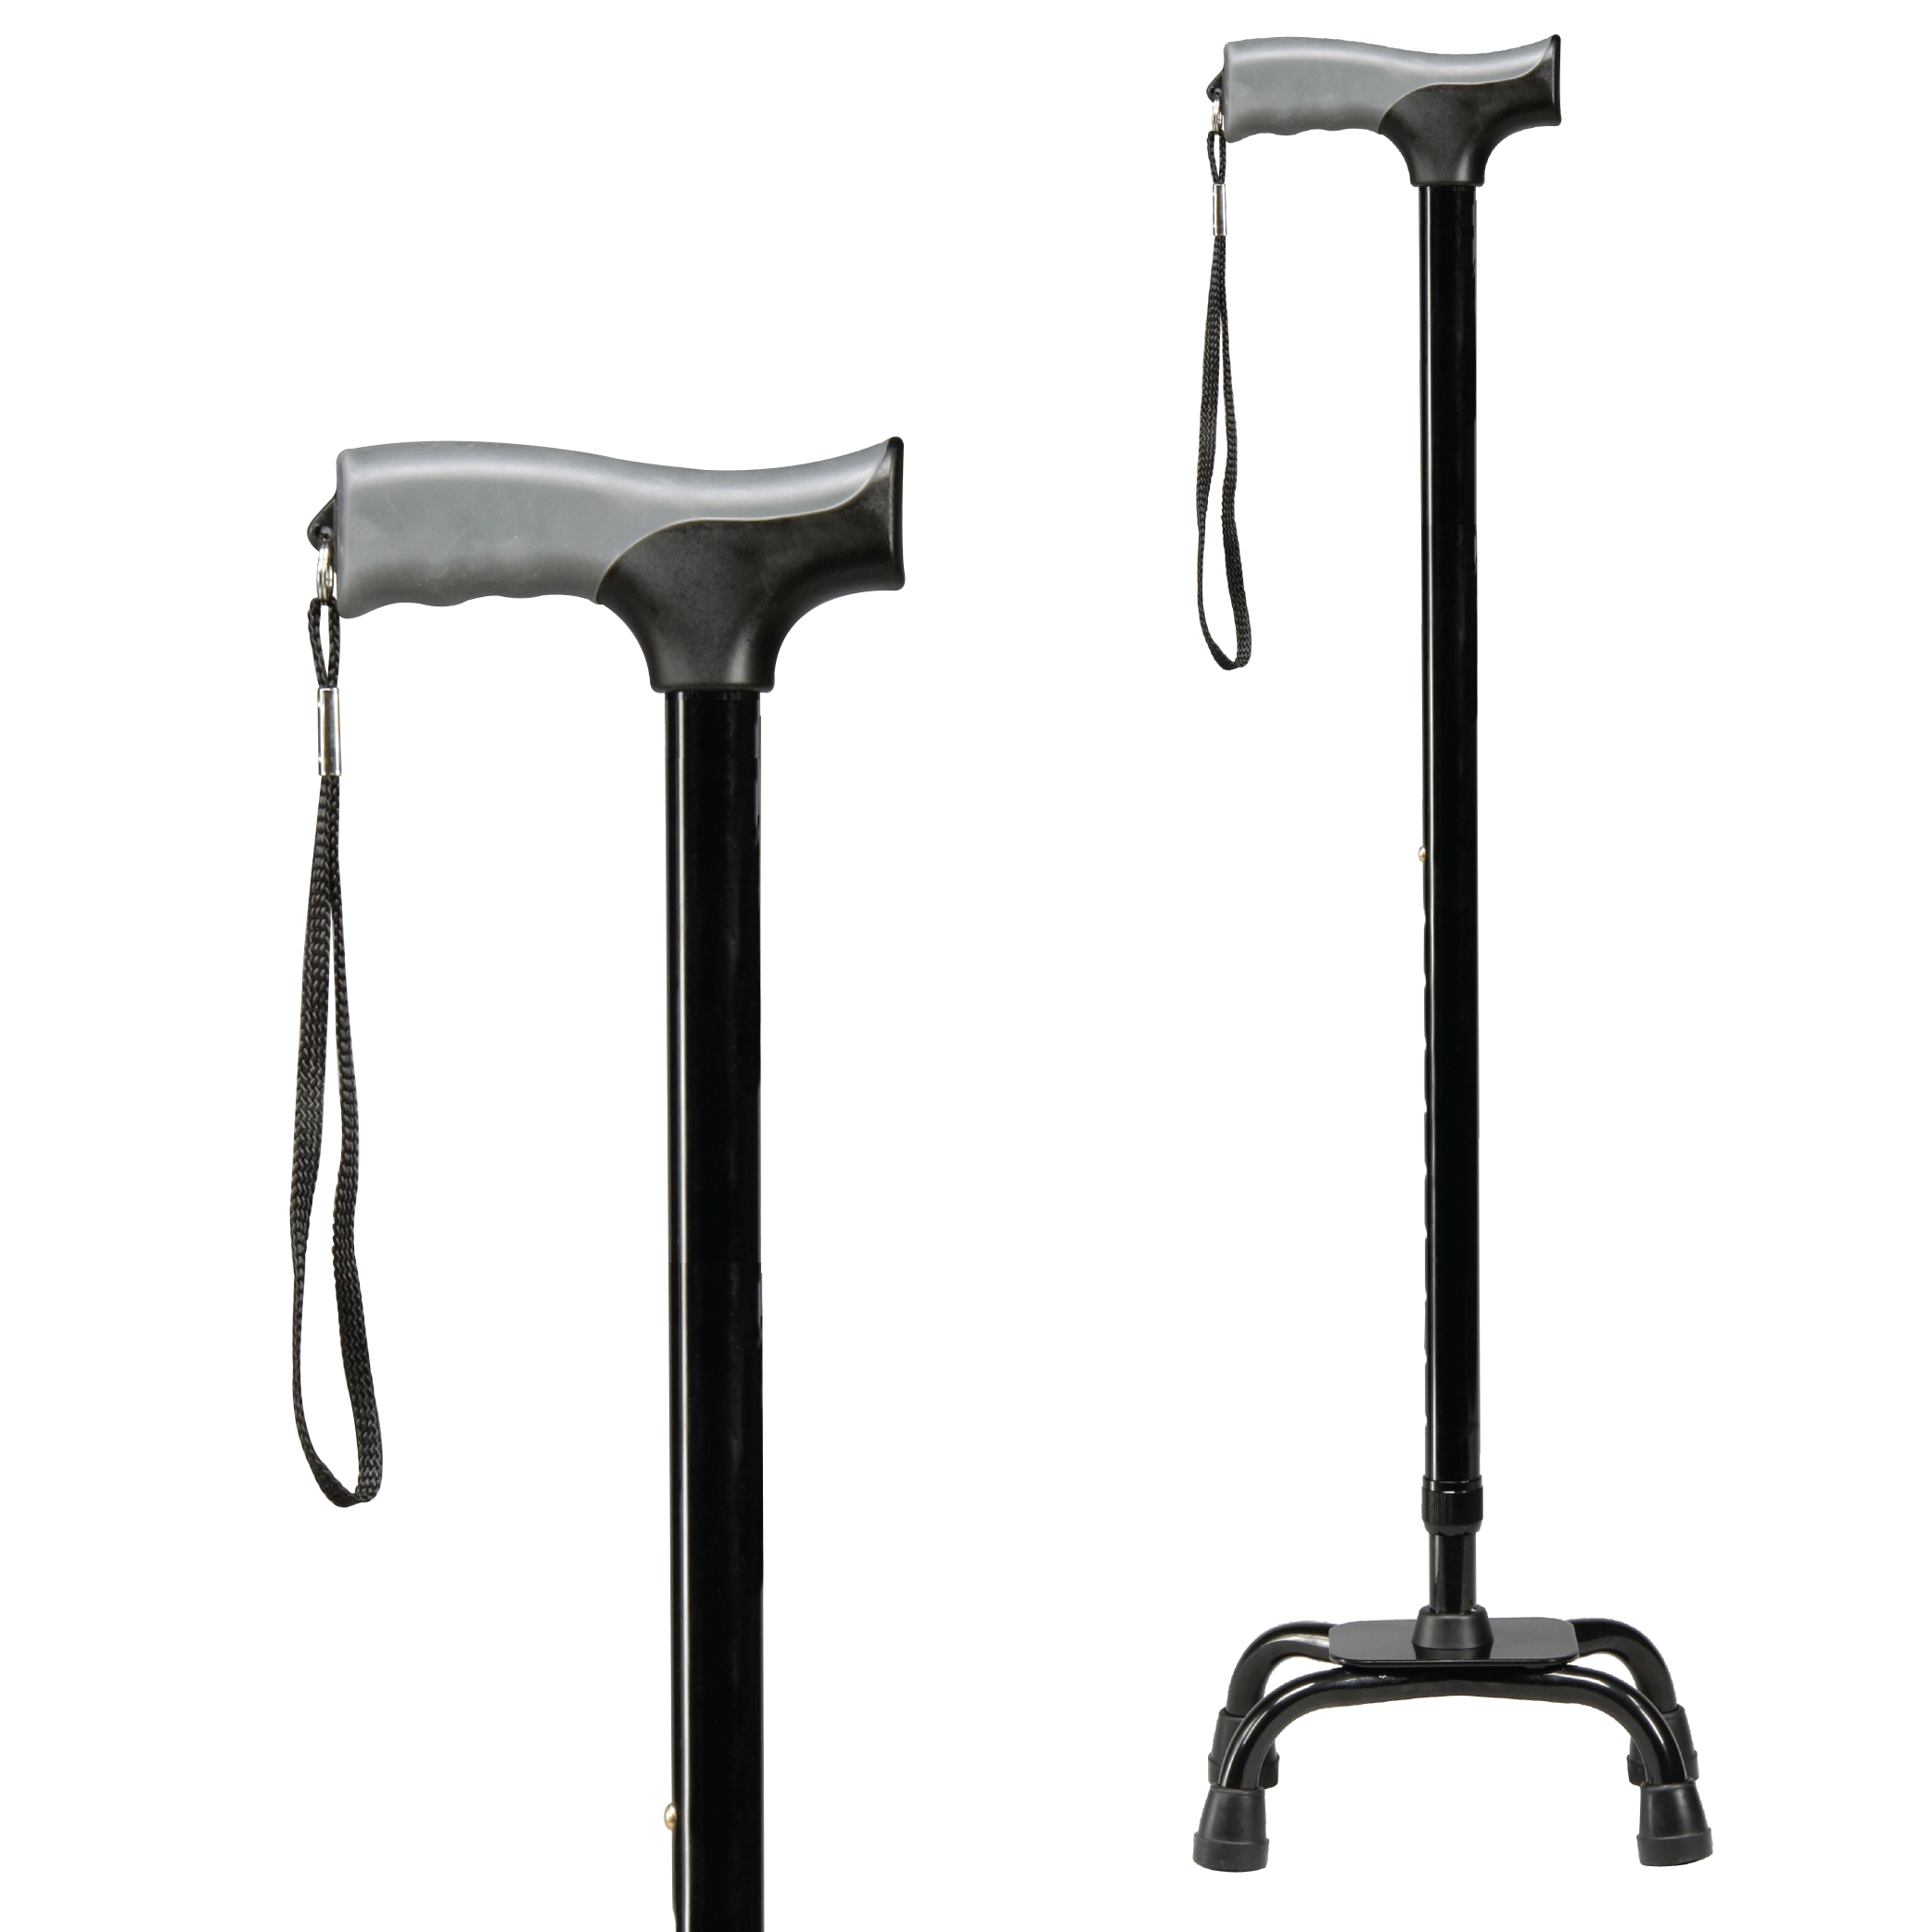 Carex Small Base Quad Cane with Soft Grip Derby Handle - Carex Health Brands